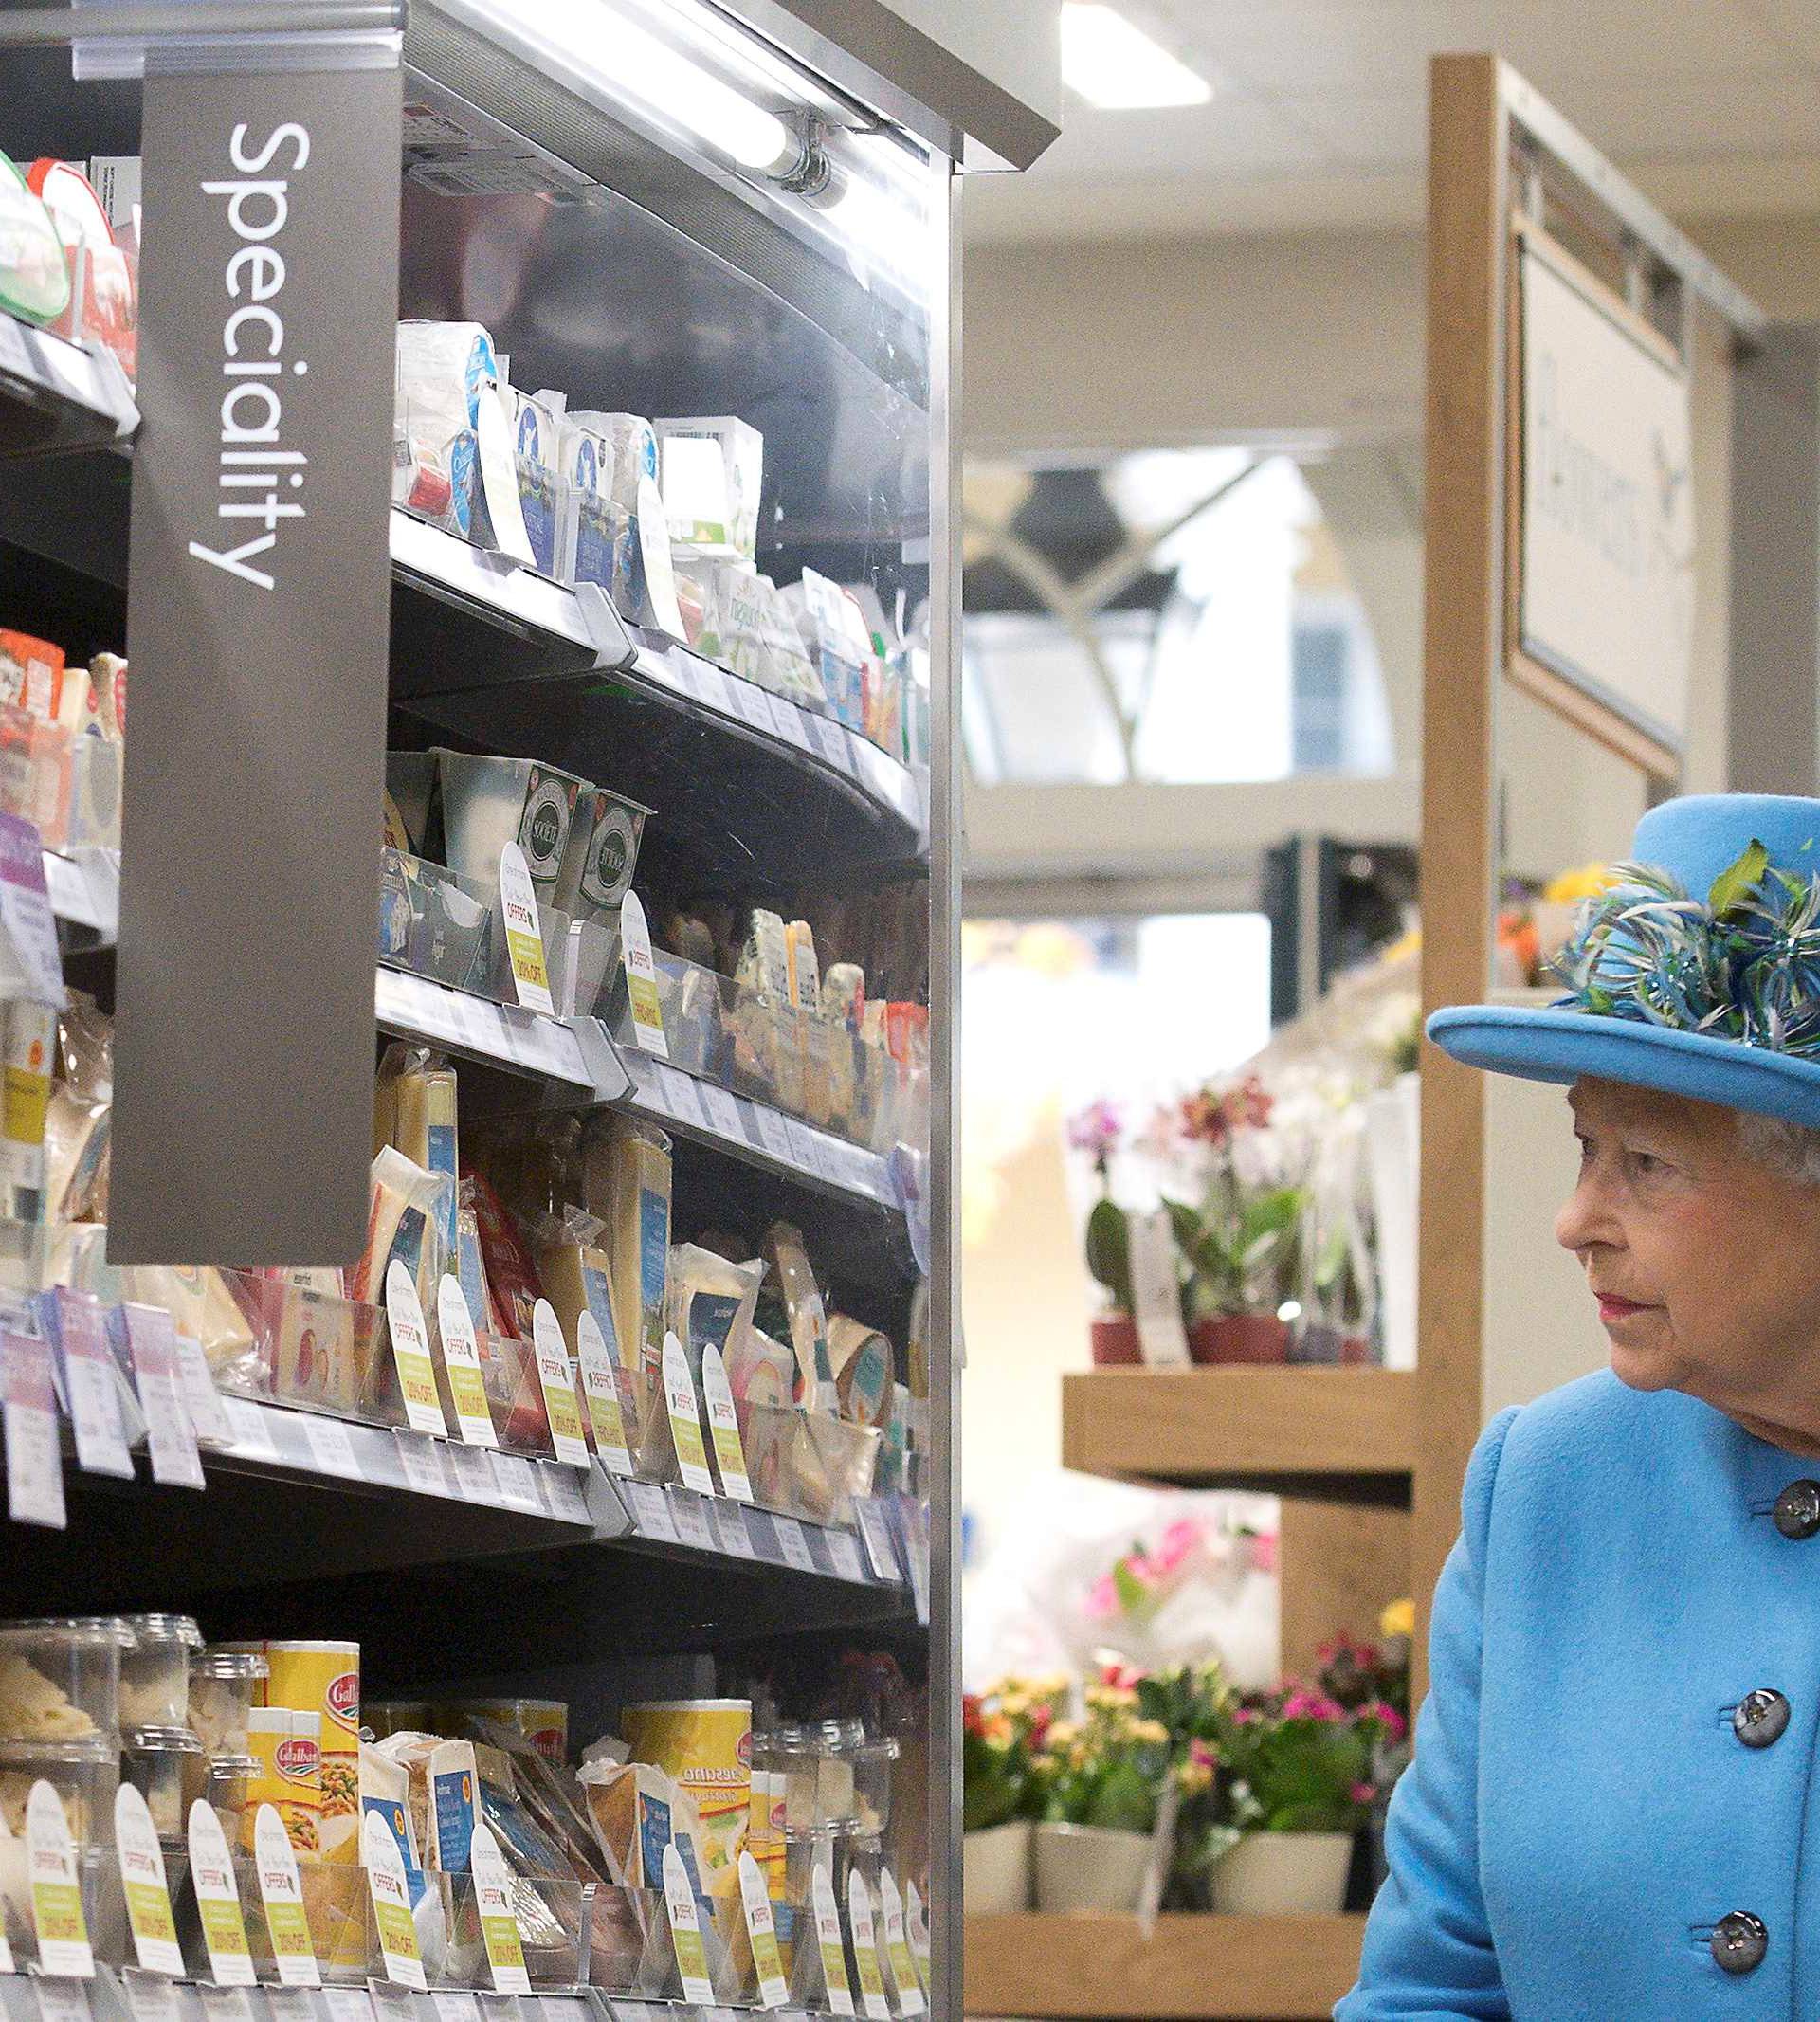 Britain's Queen Elizabeth looks at products on the shelves at a Waitrose supermarket during a visit  to the town of Poundbury